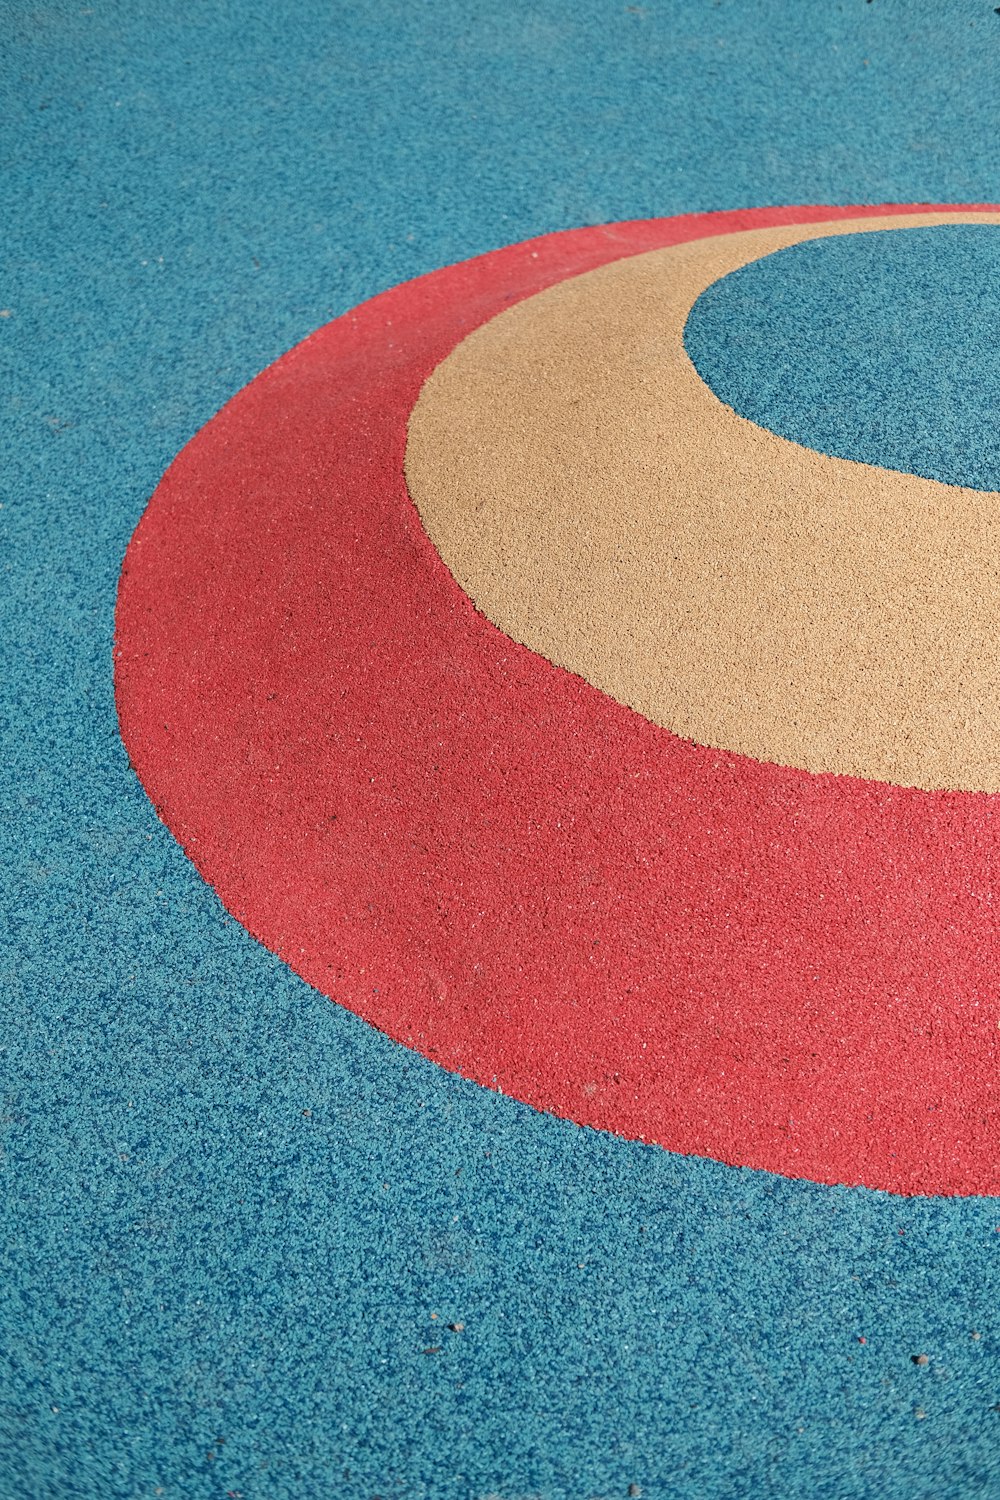 a close up of a red, white, and blue rug